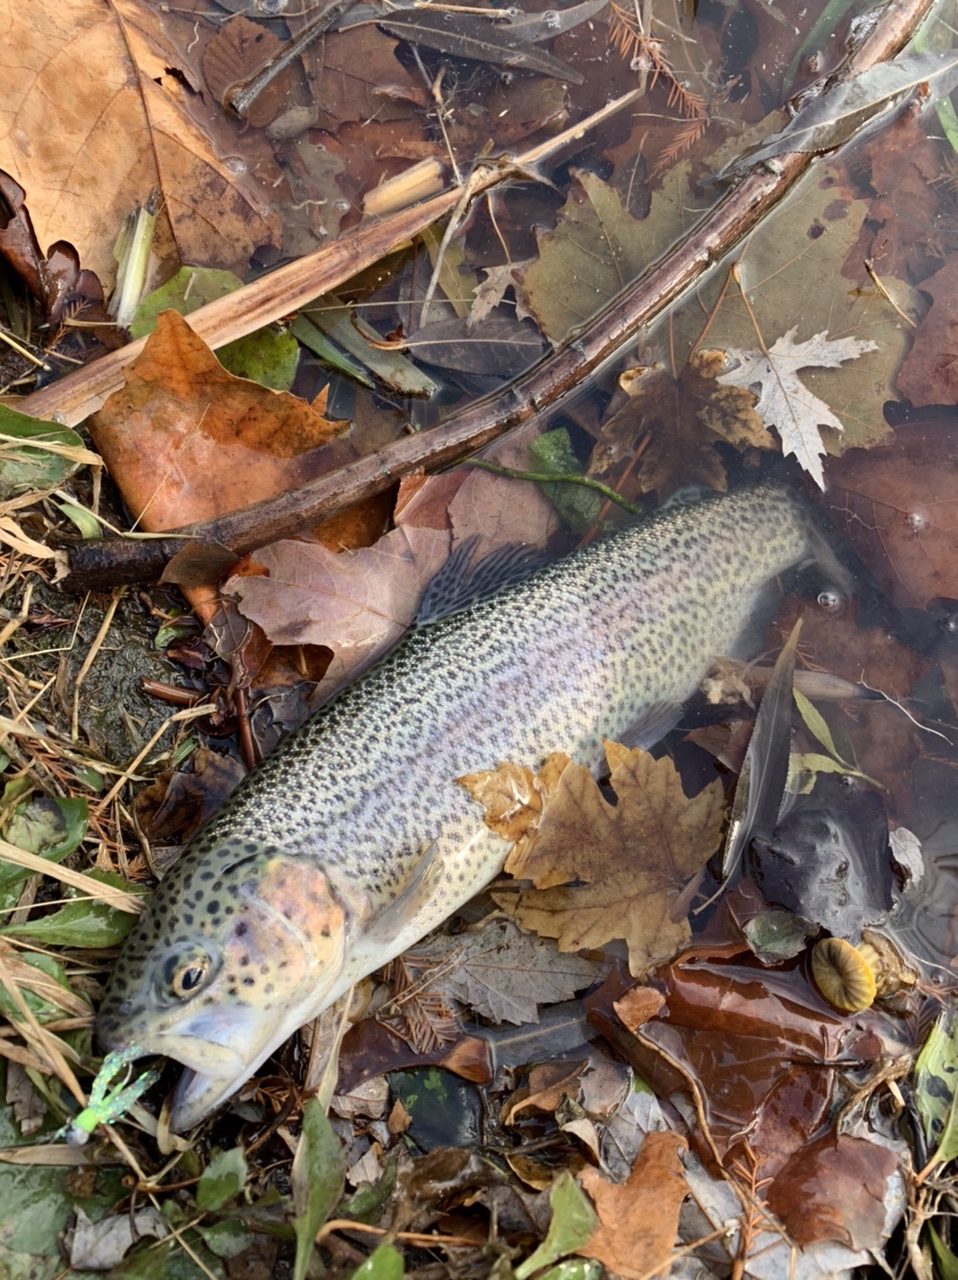 St. Louis Winter Trout fishing - MO-Outdoors tips and tactics